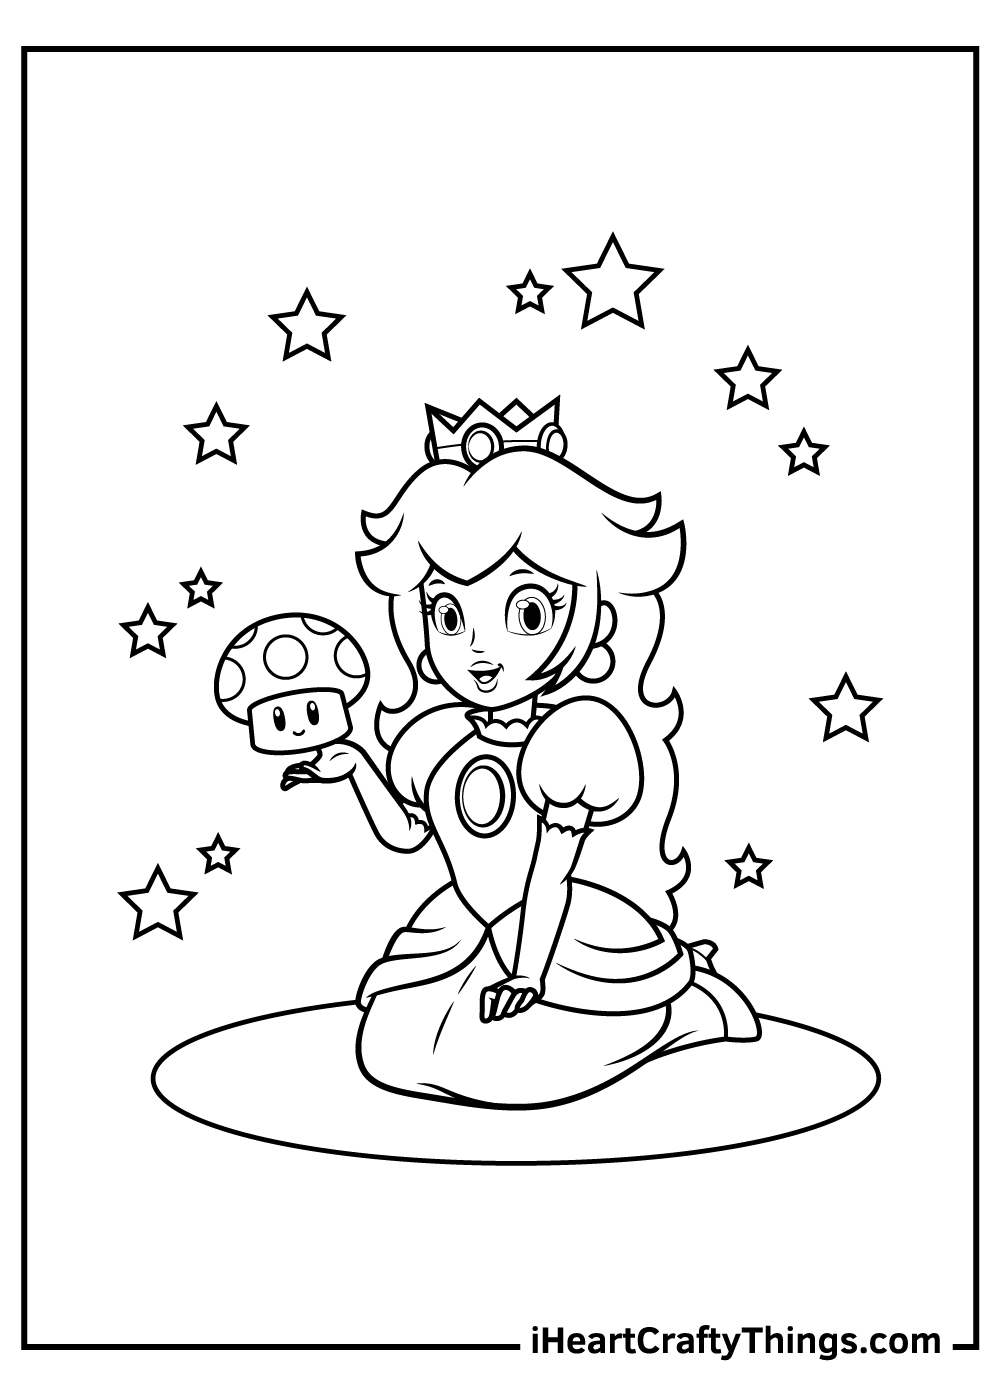 free printable princess peach coloring pages